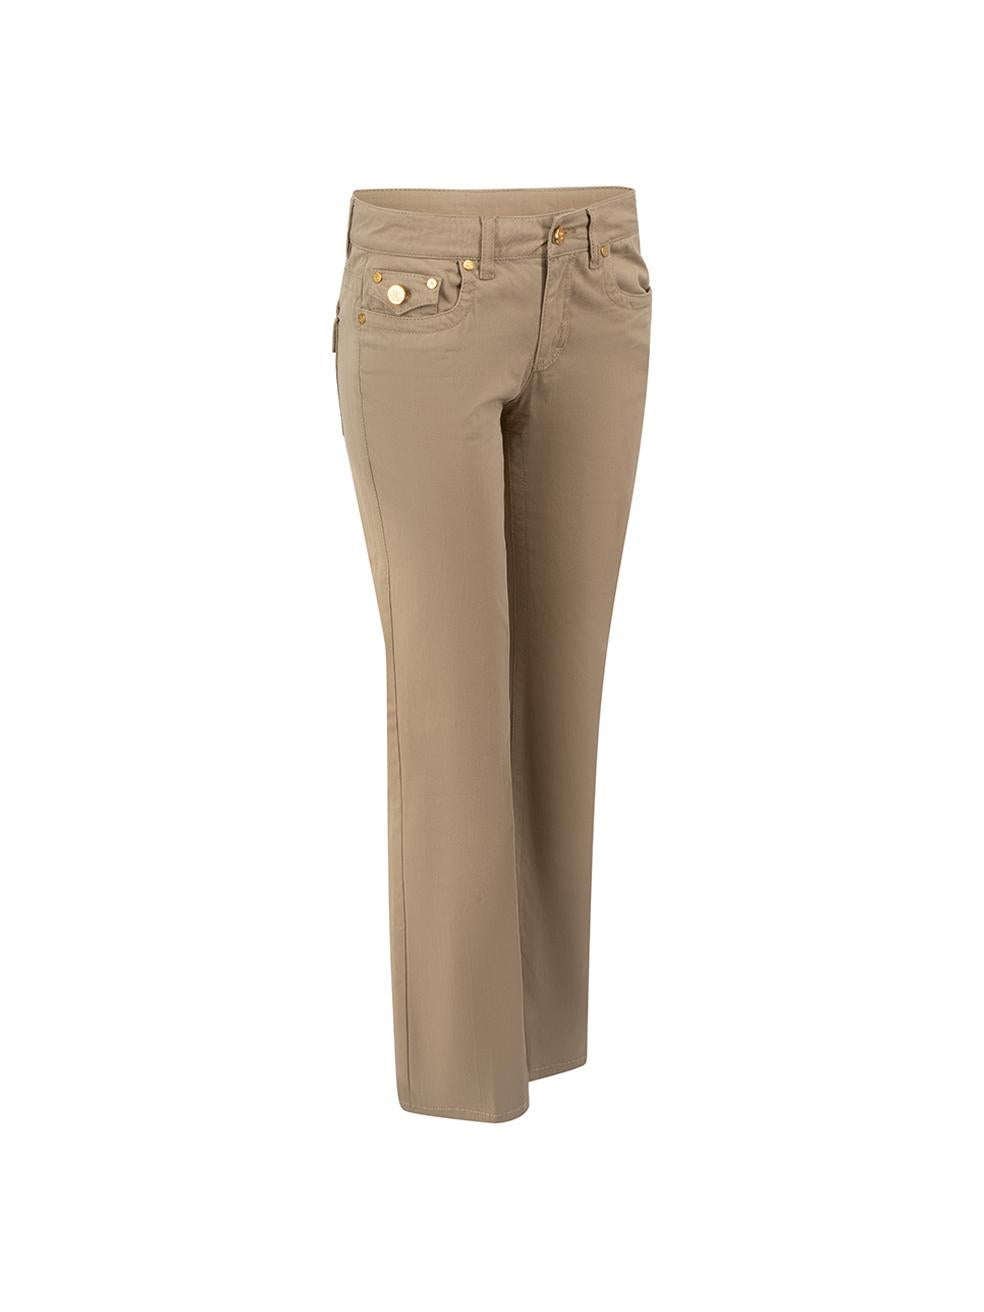 CONDITION is Very good. Hardly any visible wear to trousers is evident on this used Roberto Cavalli designer resale item.
 
Details
Light brown
Cotton
Trousers
Flared
Low rise
Gond tone hardware
3x Front pockets
2x Back pockets
Fly zip and button